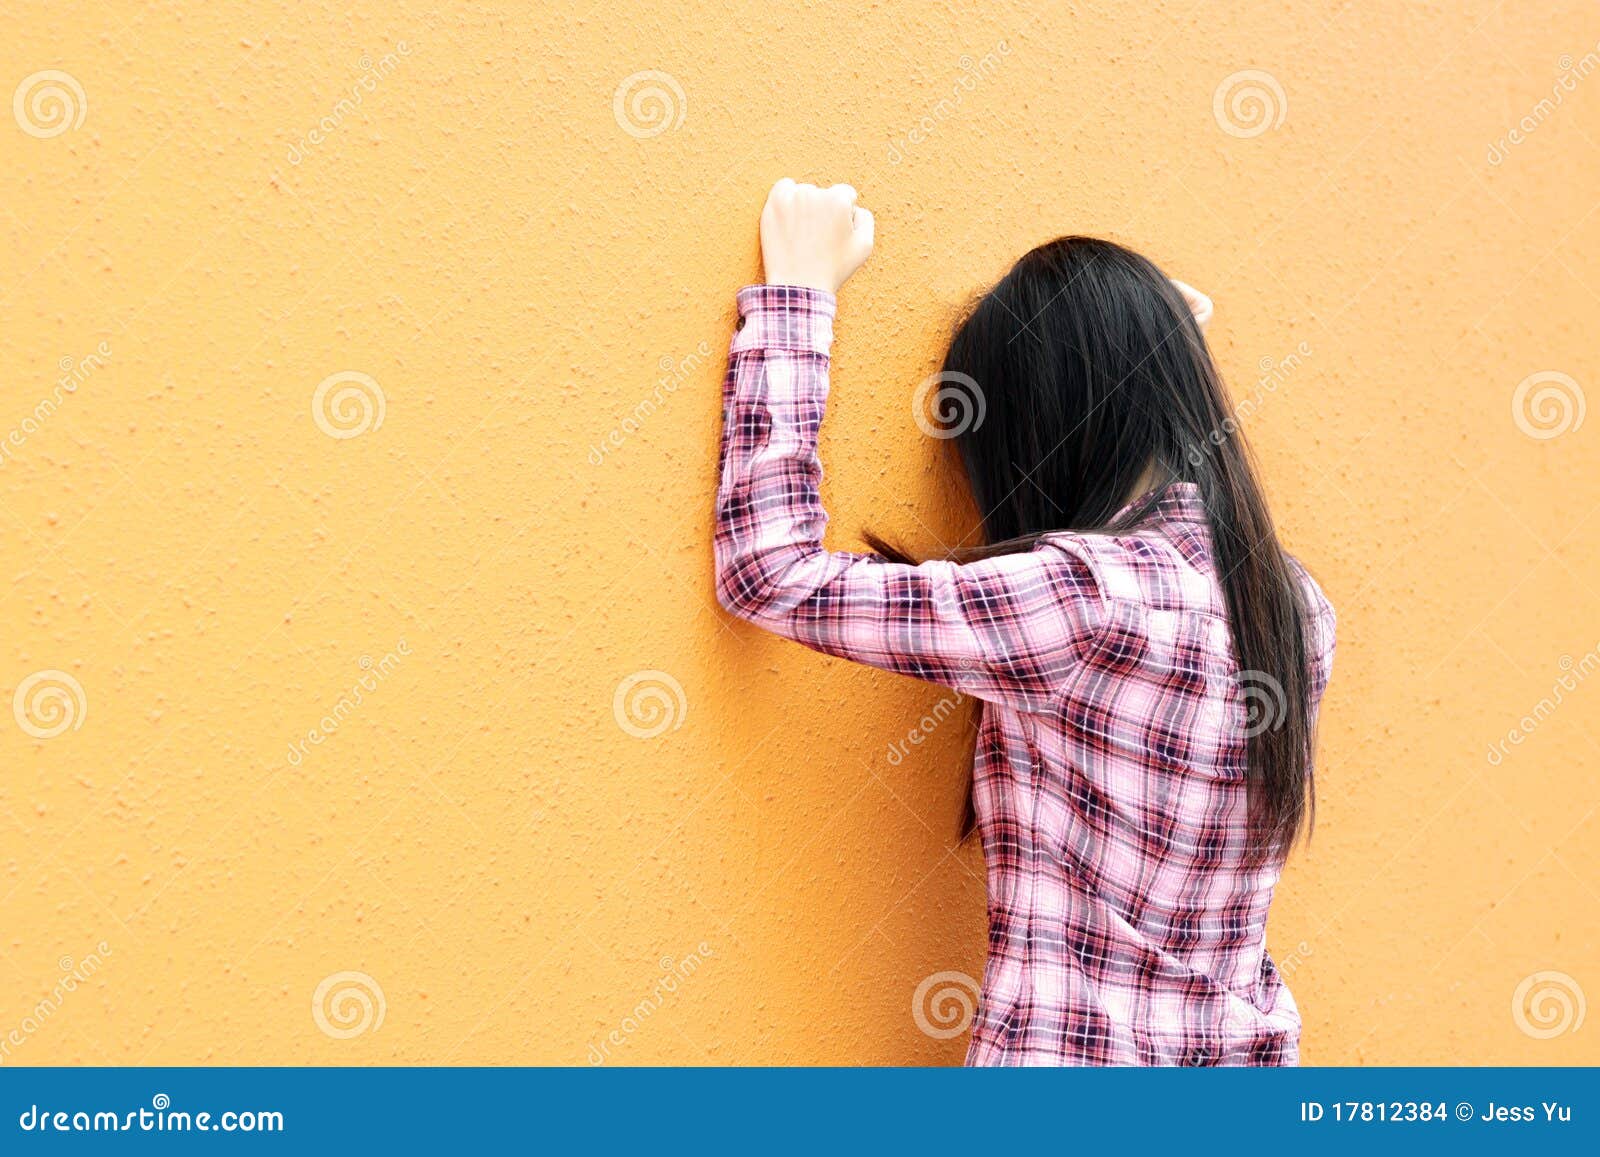 A Chinese Girl Who is Very Sad Stock Photo - Image of blue ...